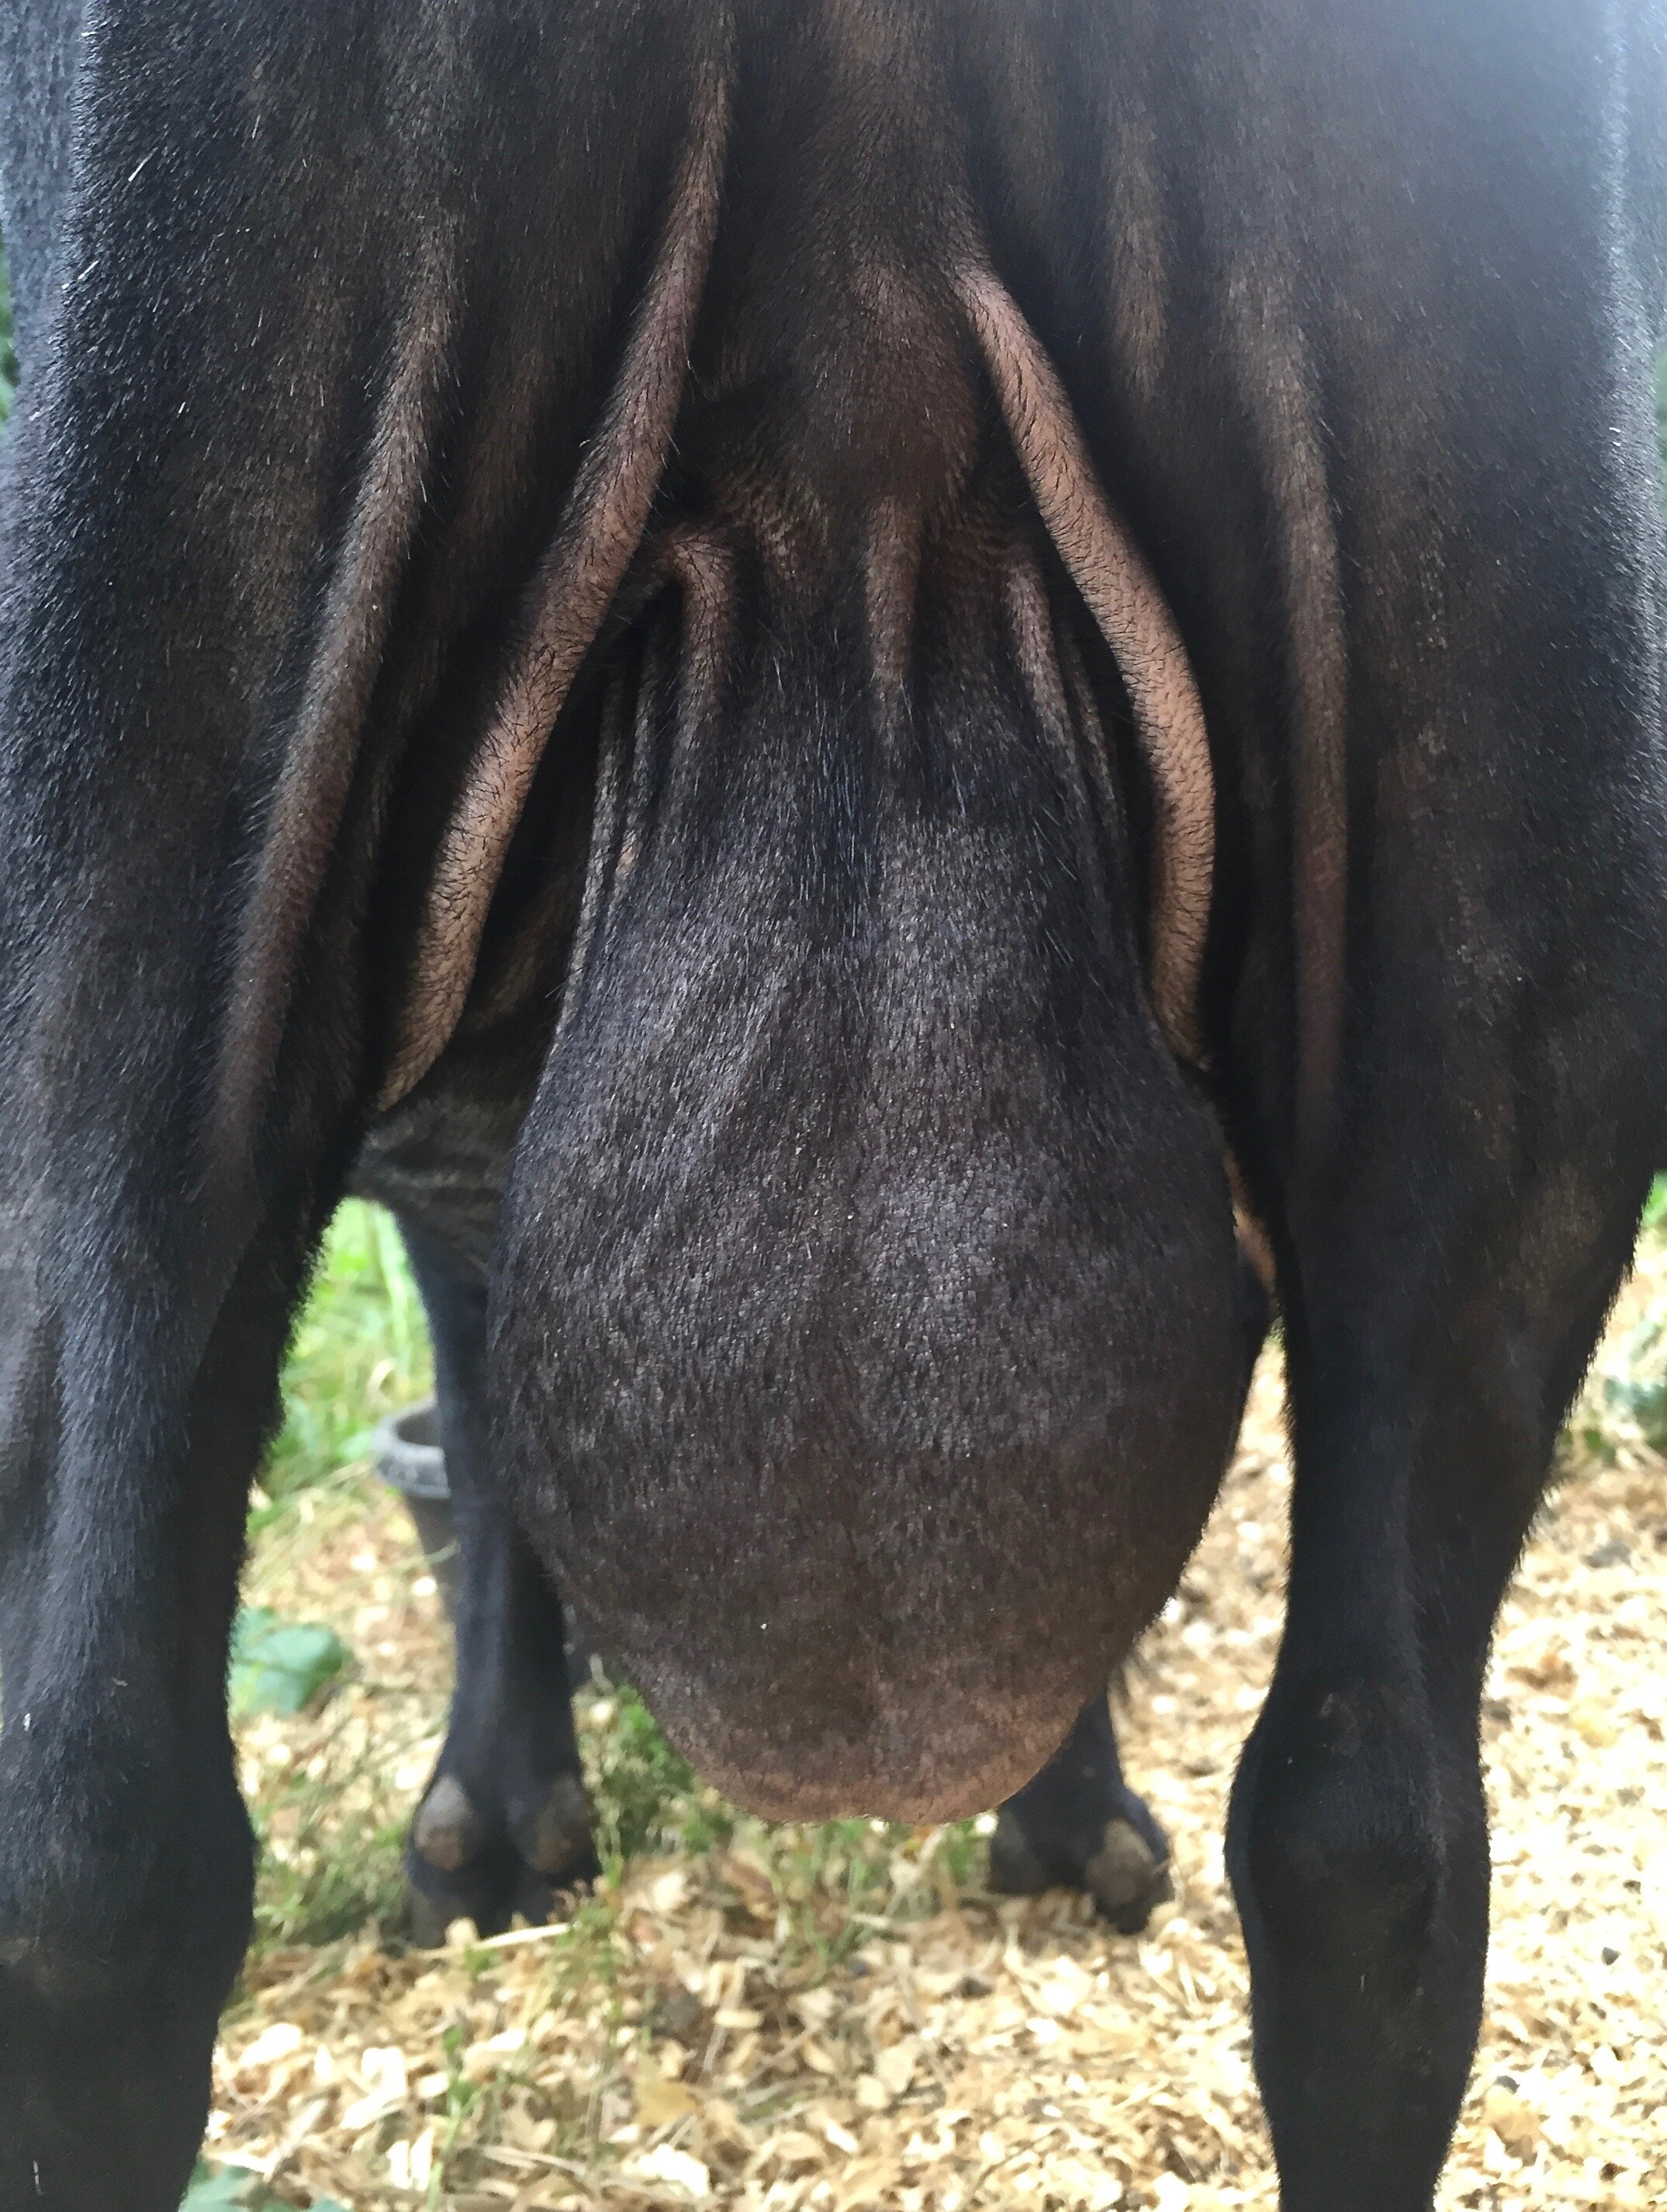 Showing off Herc's wrinkly skin - August 2018